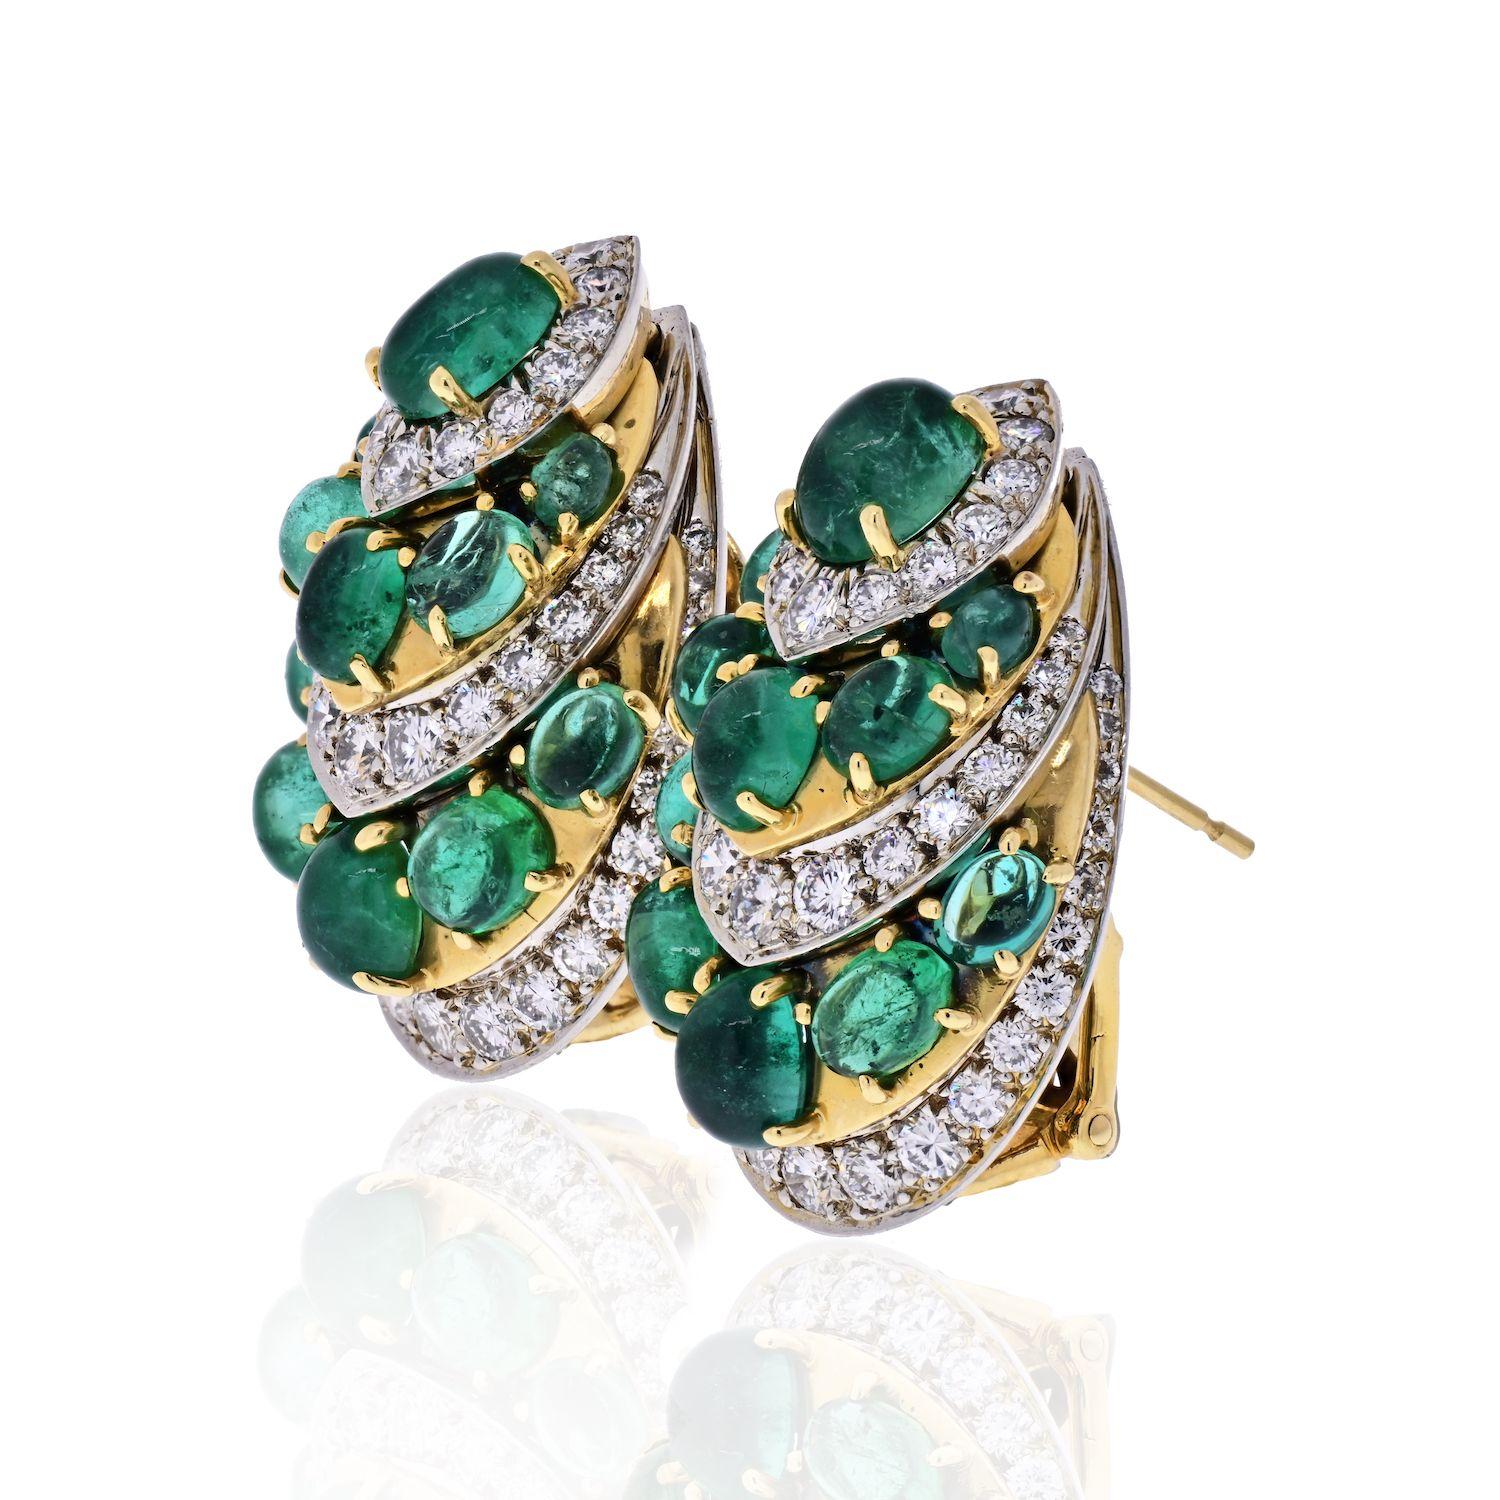 These beautiful earrings are crafted by David Webb and are truly special. We love the smooth cabochon finished green emeralds spaced with just a touch of round diamonds. Designed for pierced ears you can be certain these will stay secure on your